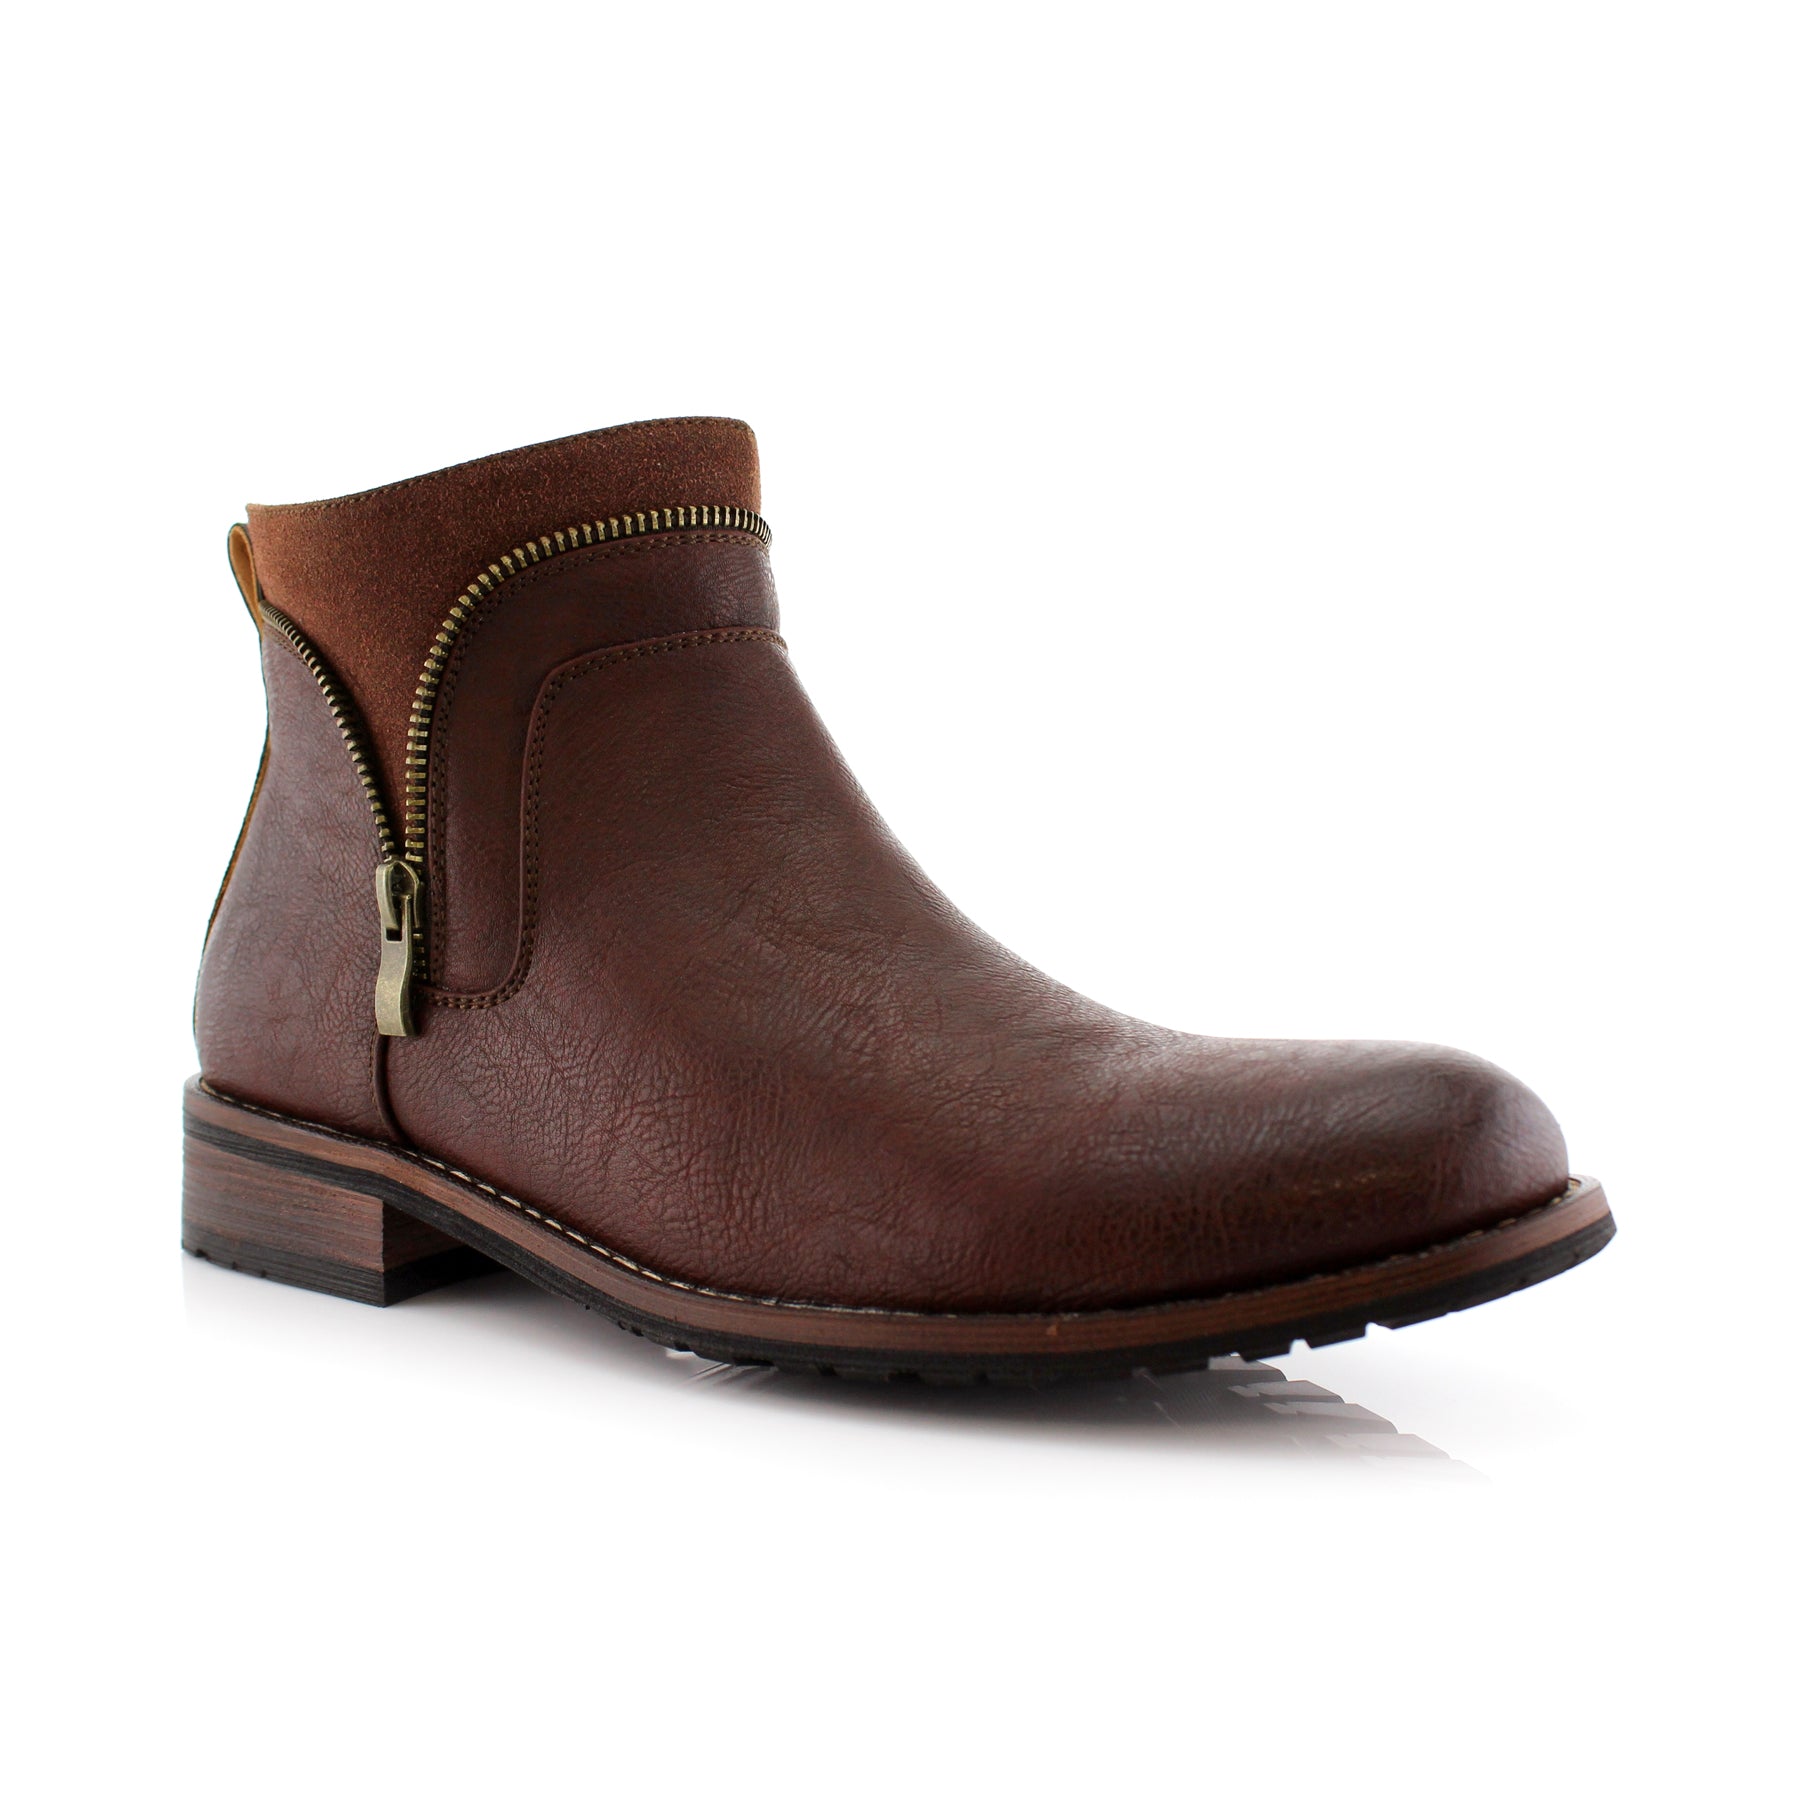 Duo-Textured Zipper Closure Boots | Willie by Ferro Aldo | Conal Footwear | Main Angle View